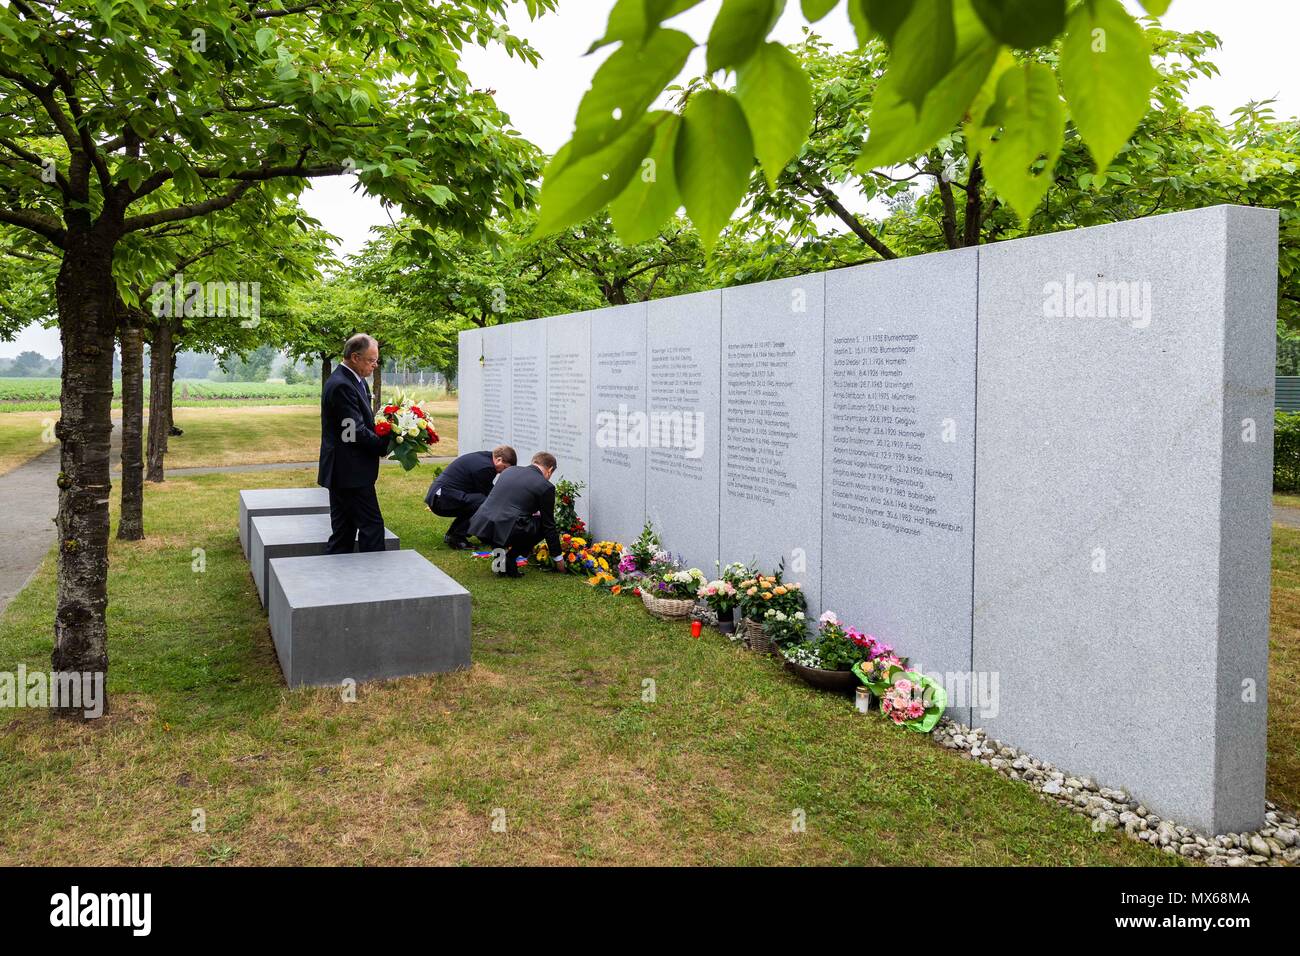 Eschede, Germany. 03 May 2018, Germany, Eschede: The Parliamentary State Secretary from the Christian Democratic Union (CDU), Enak Ferlemann (L-R), Chairman of the Deutsche Bahn, Richard Lutz, and the Premier of Lower Saxony from the Social Democratic Party (SPD), Stephan Weil, commemorating the victims of the train accident in Eschede for the 20th anniversary of the accident. The ICE 'Wilhelm Conrad Roentgen' derailed on the 3 June 1998 at tempo 200 and drove into a highway bridge. 101 people died. Photo: Philipp von Ditfurth/dpa Stock Photo